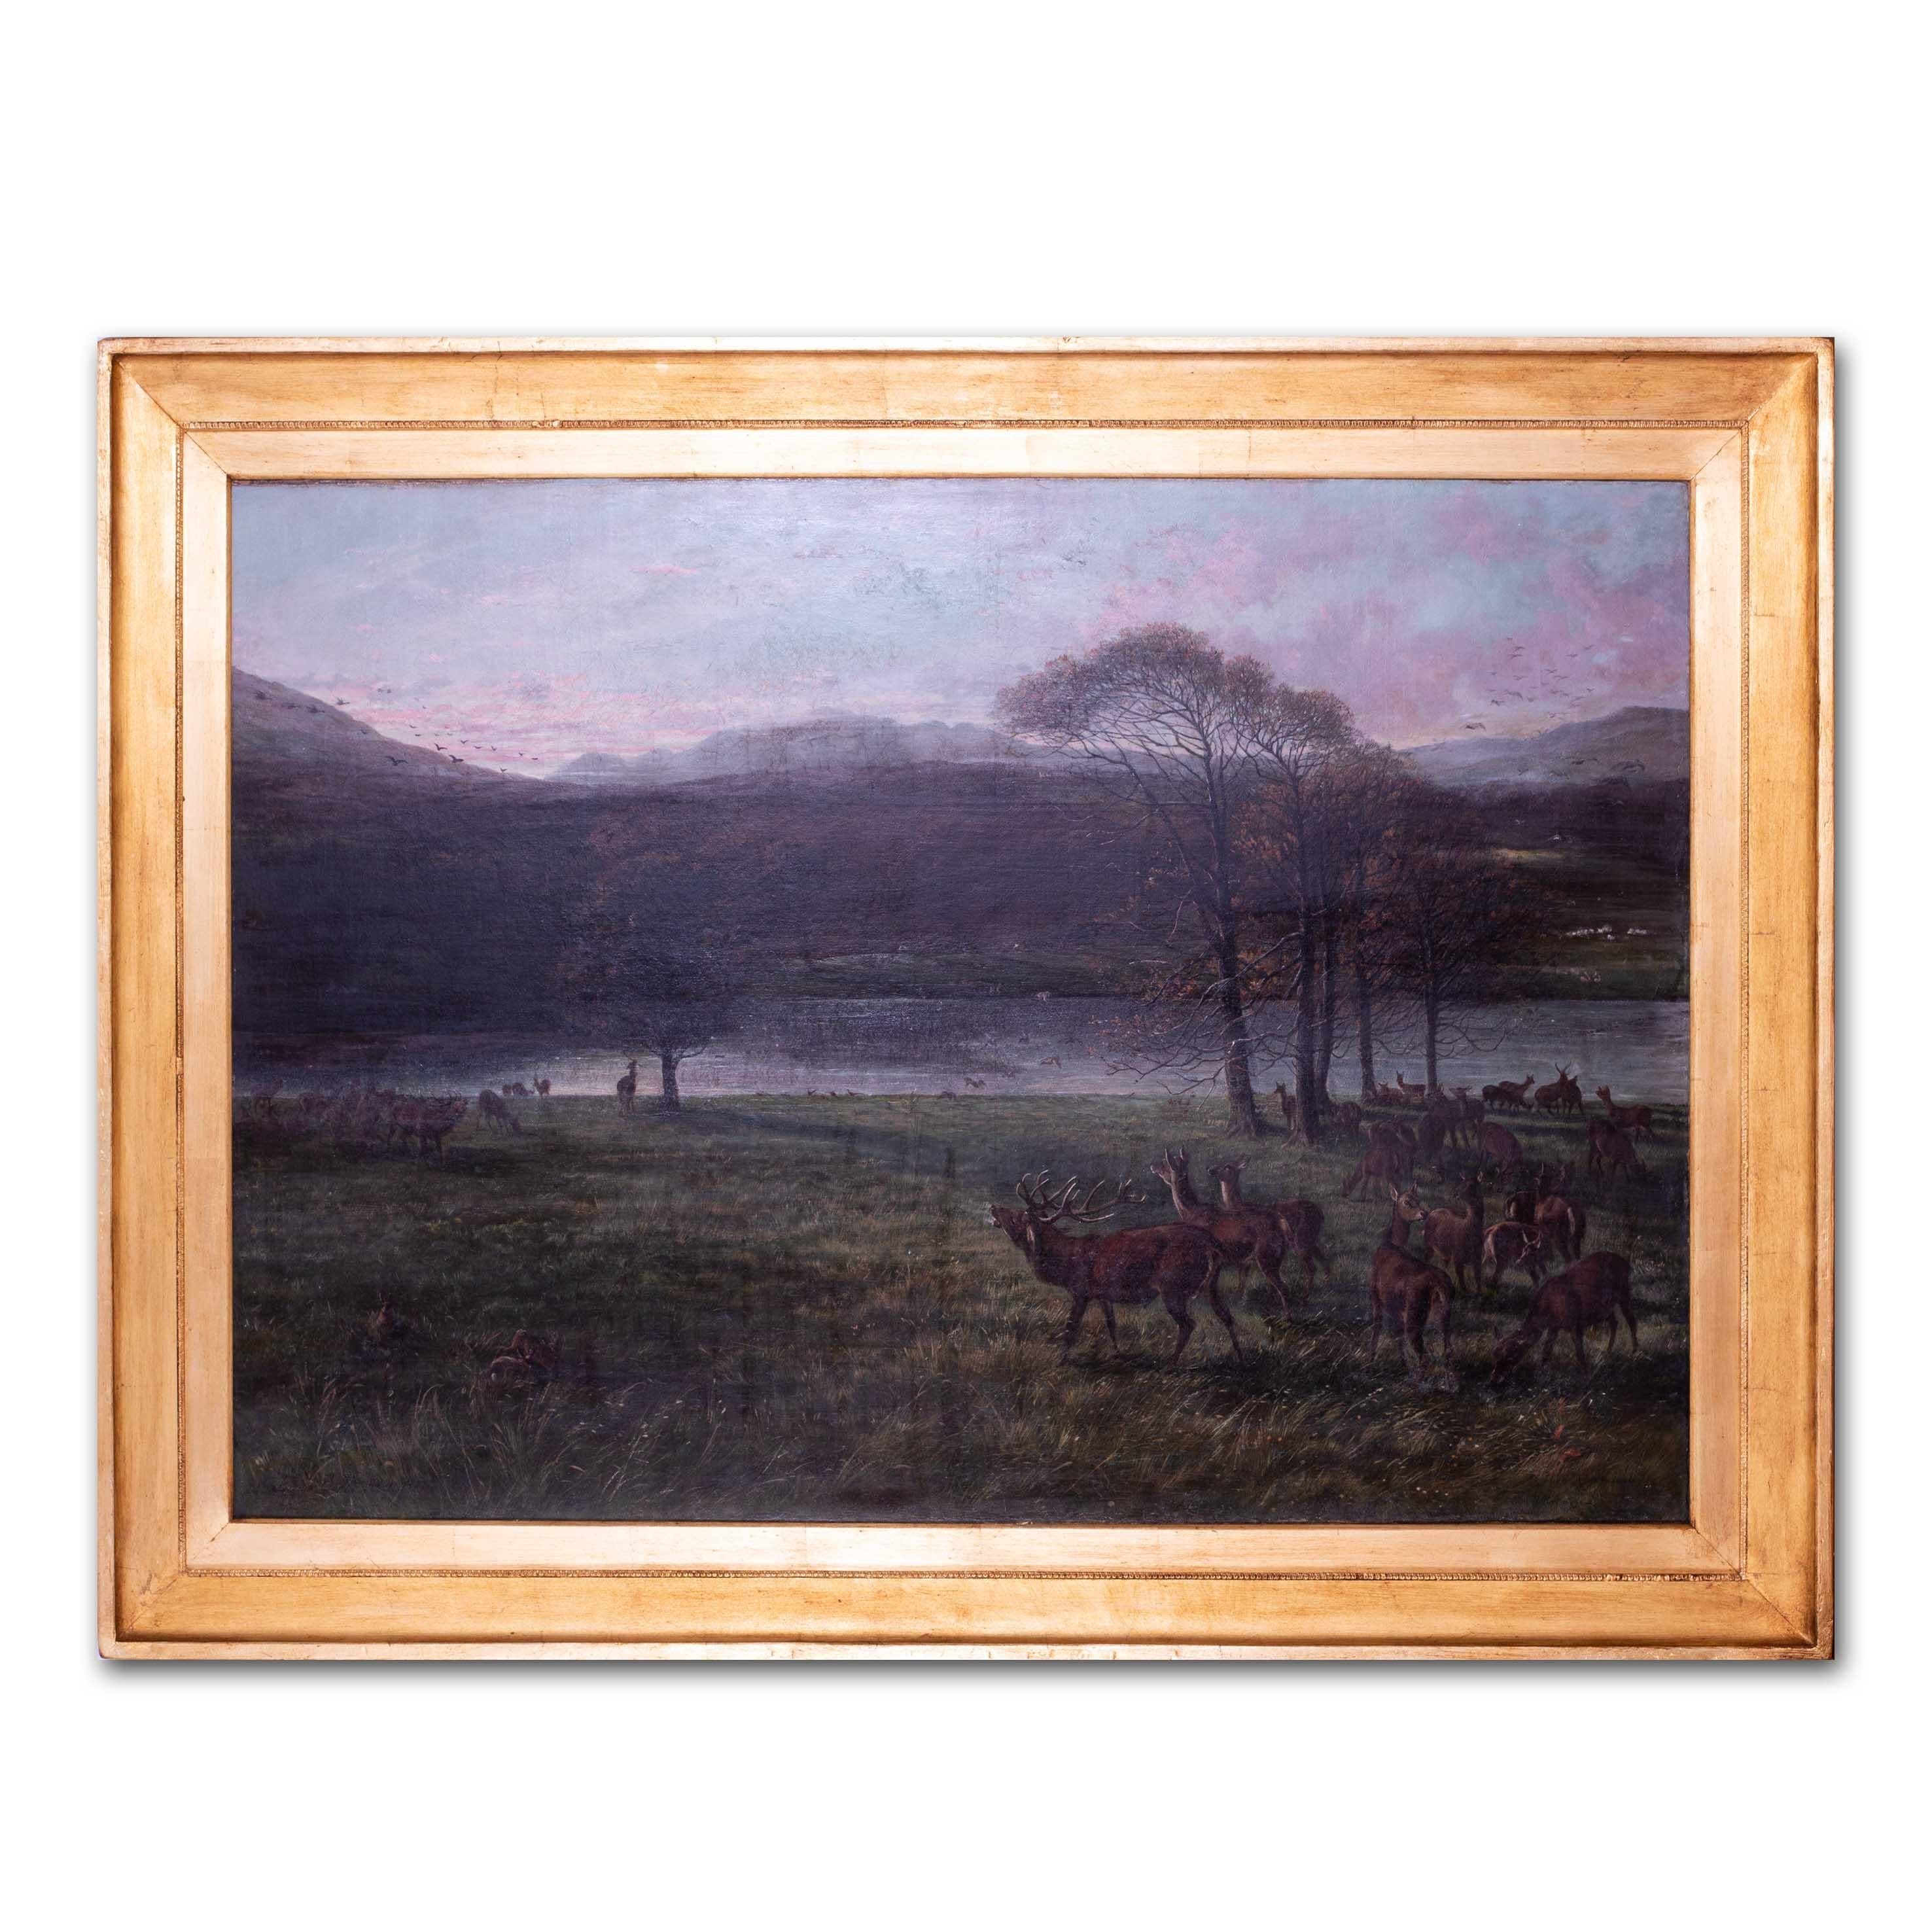 Large landscape oil painting of the Deer Park at Vaynol country estate, Wales - Brown Landscape Painting by George Earl